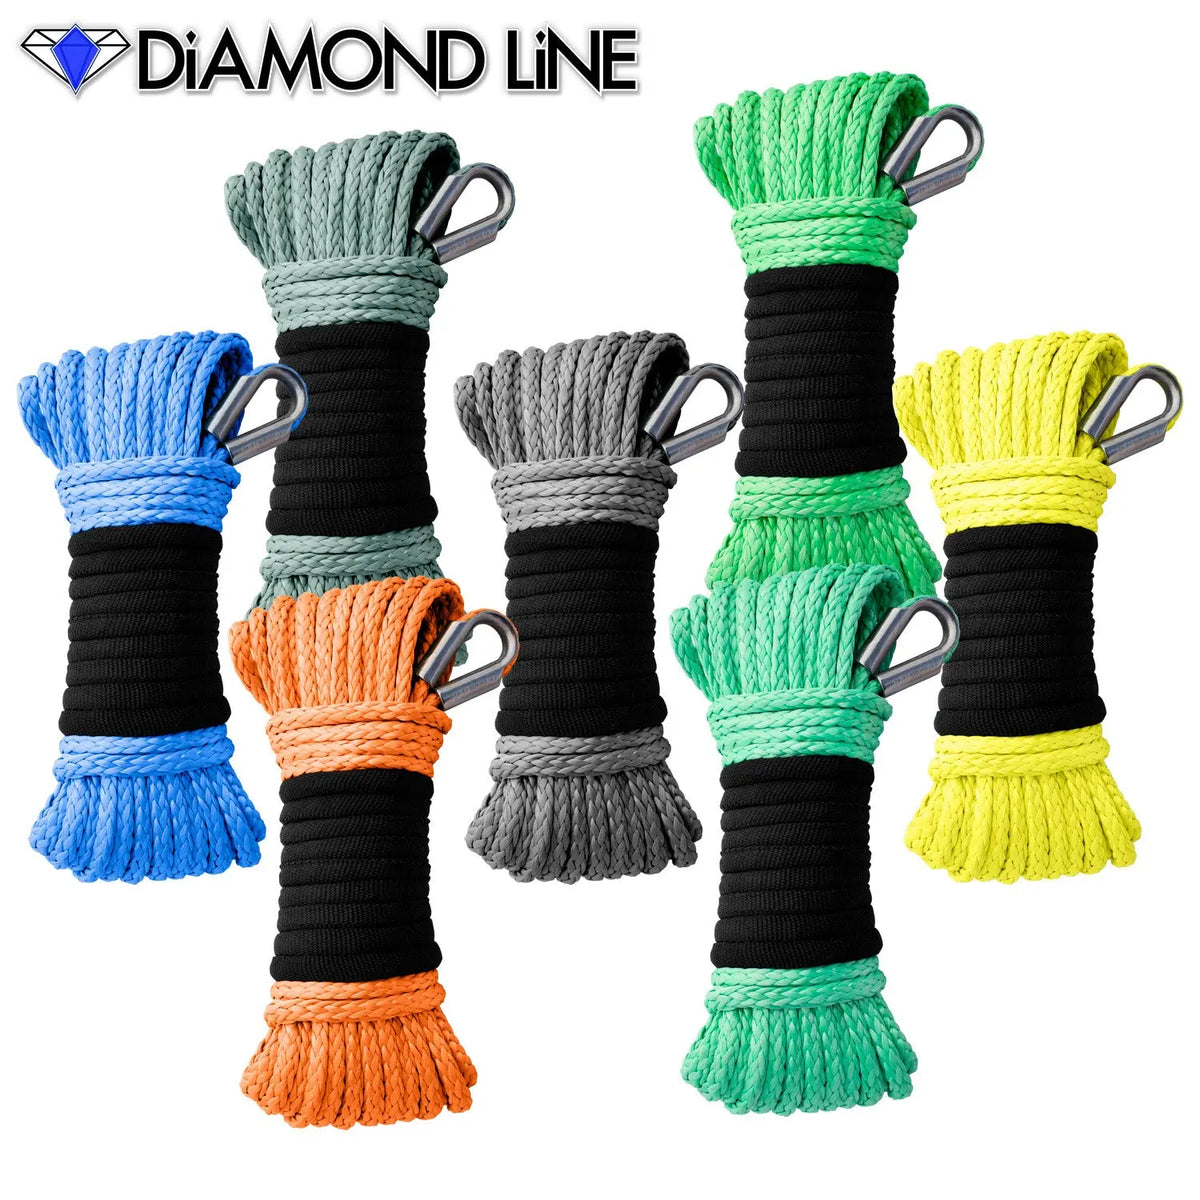 3/16" x 50' Diamond Line Winch Rope Mainline - Assorted Colors